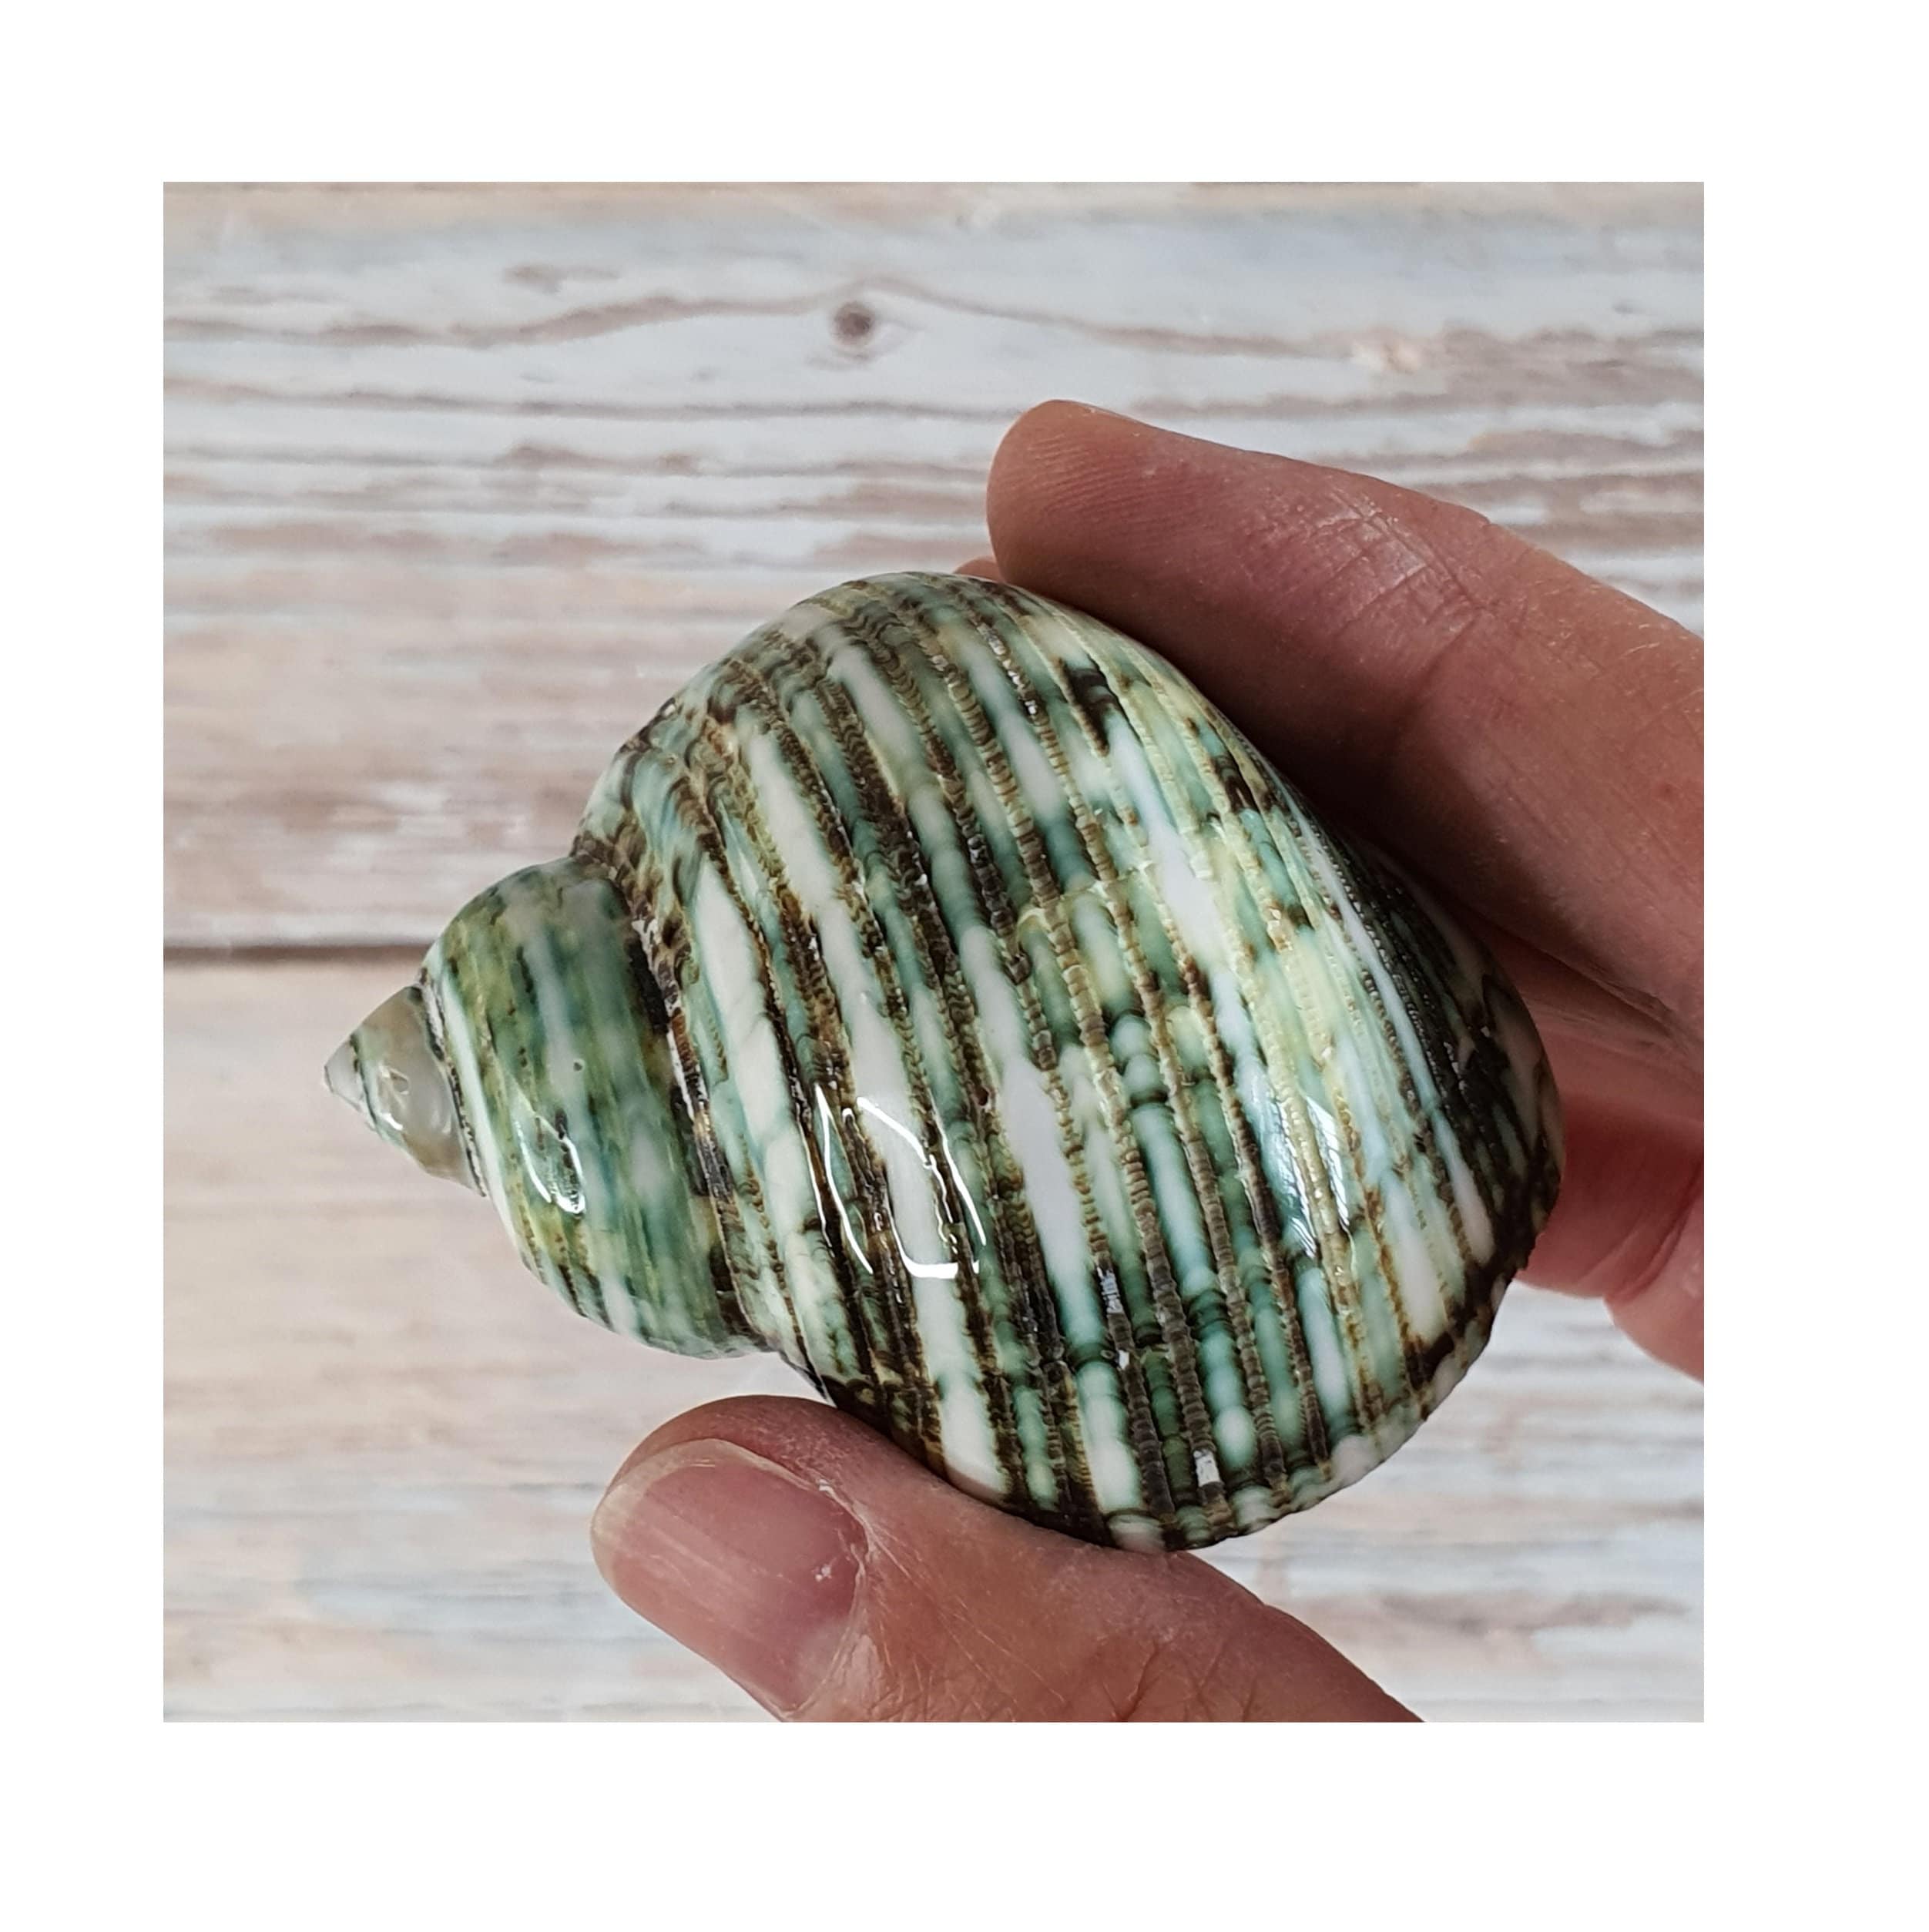 Clam Shell Crafting Accessories Supplies Decorative Styled Design